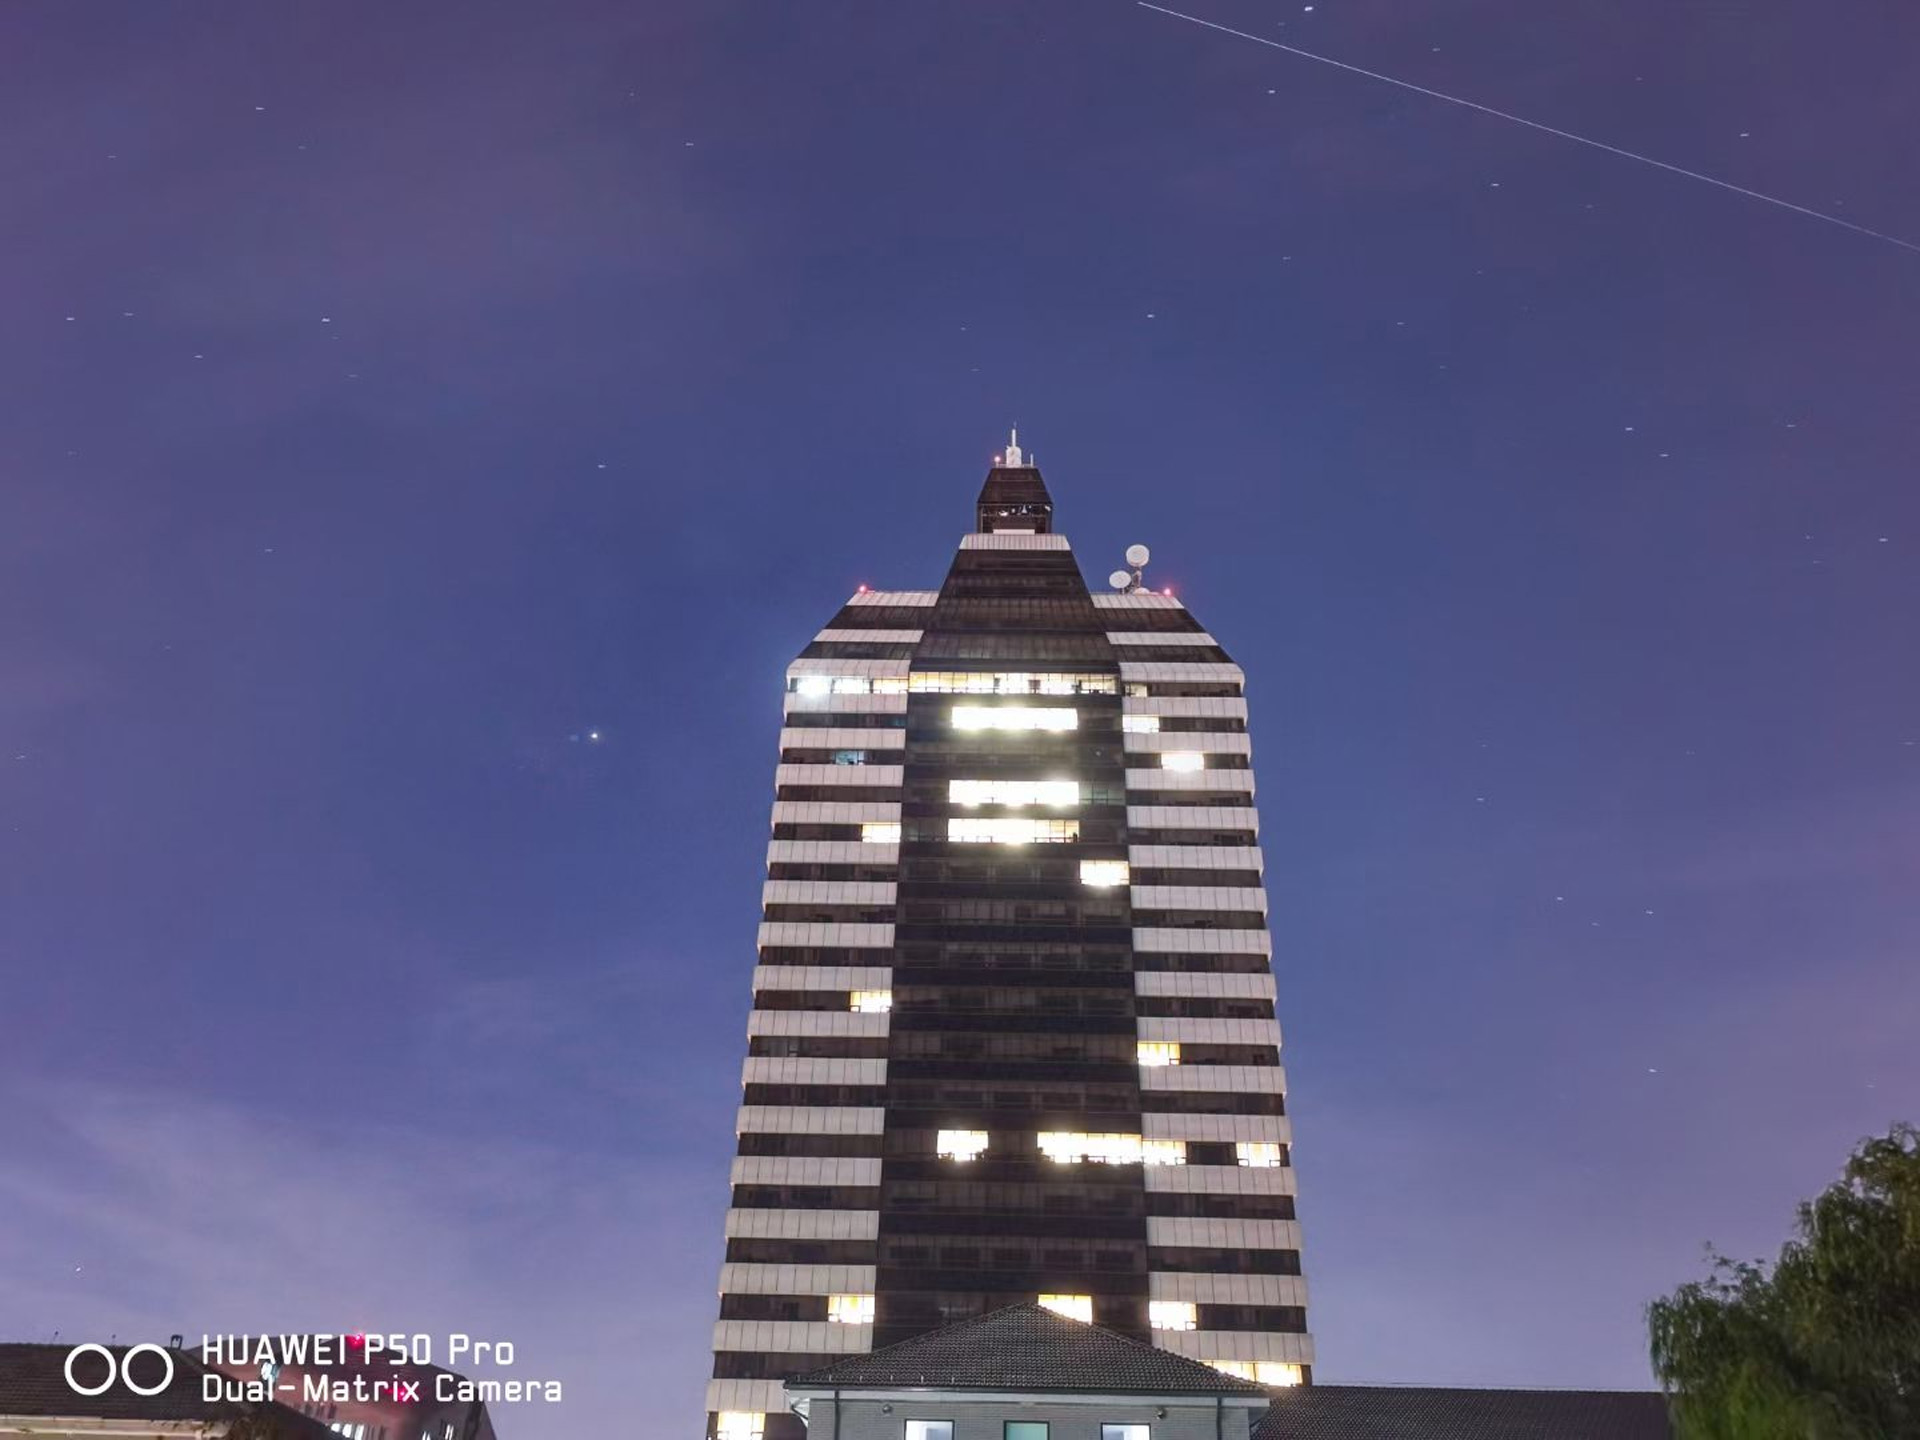 China's space station flies across the sky above the building of Xinhua News Agency in Beijing, China, October 19, 2021. /Wang Junfeng